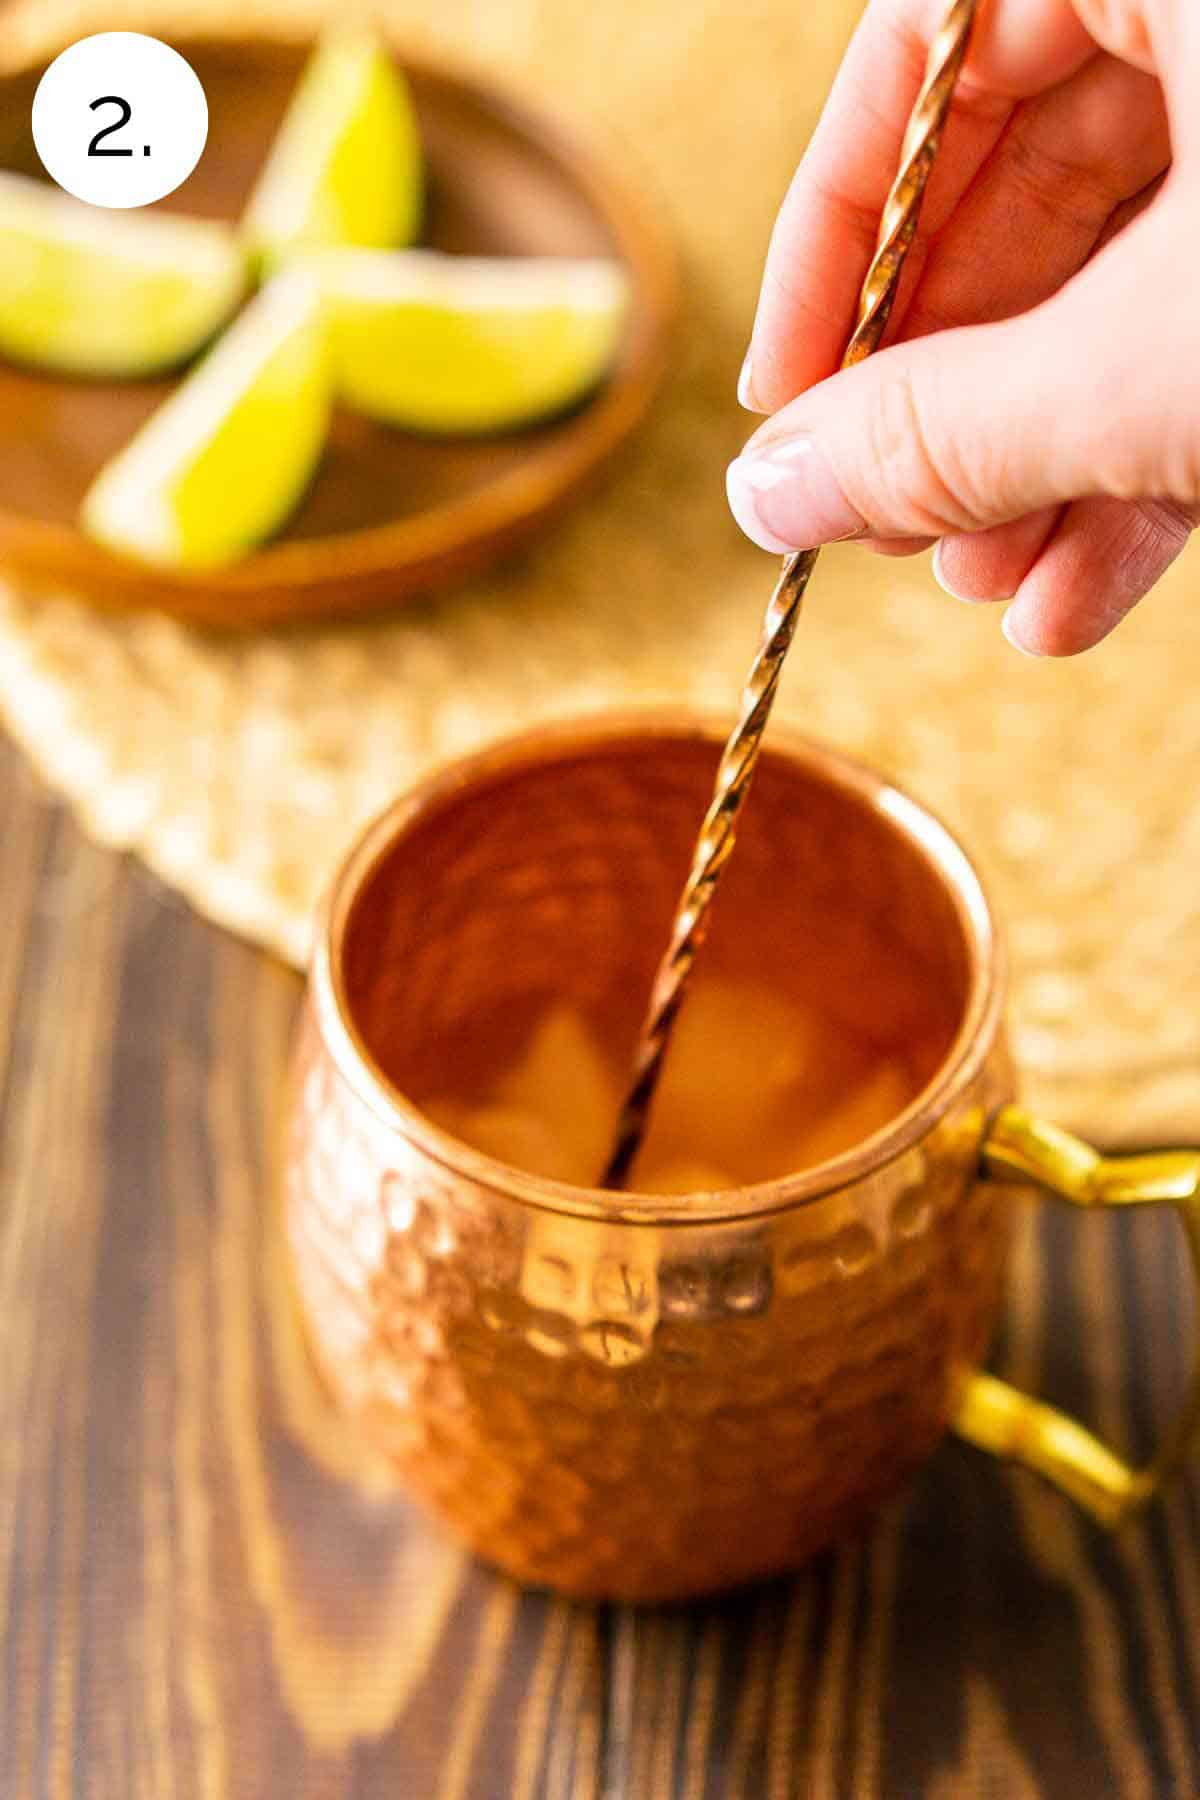 A hand stirring the lime juice, bourbon and ice in a copper mug with a bar spoon on a wooden surface.